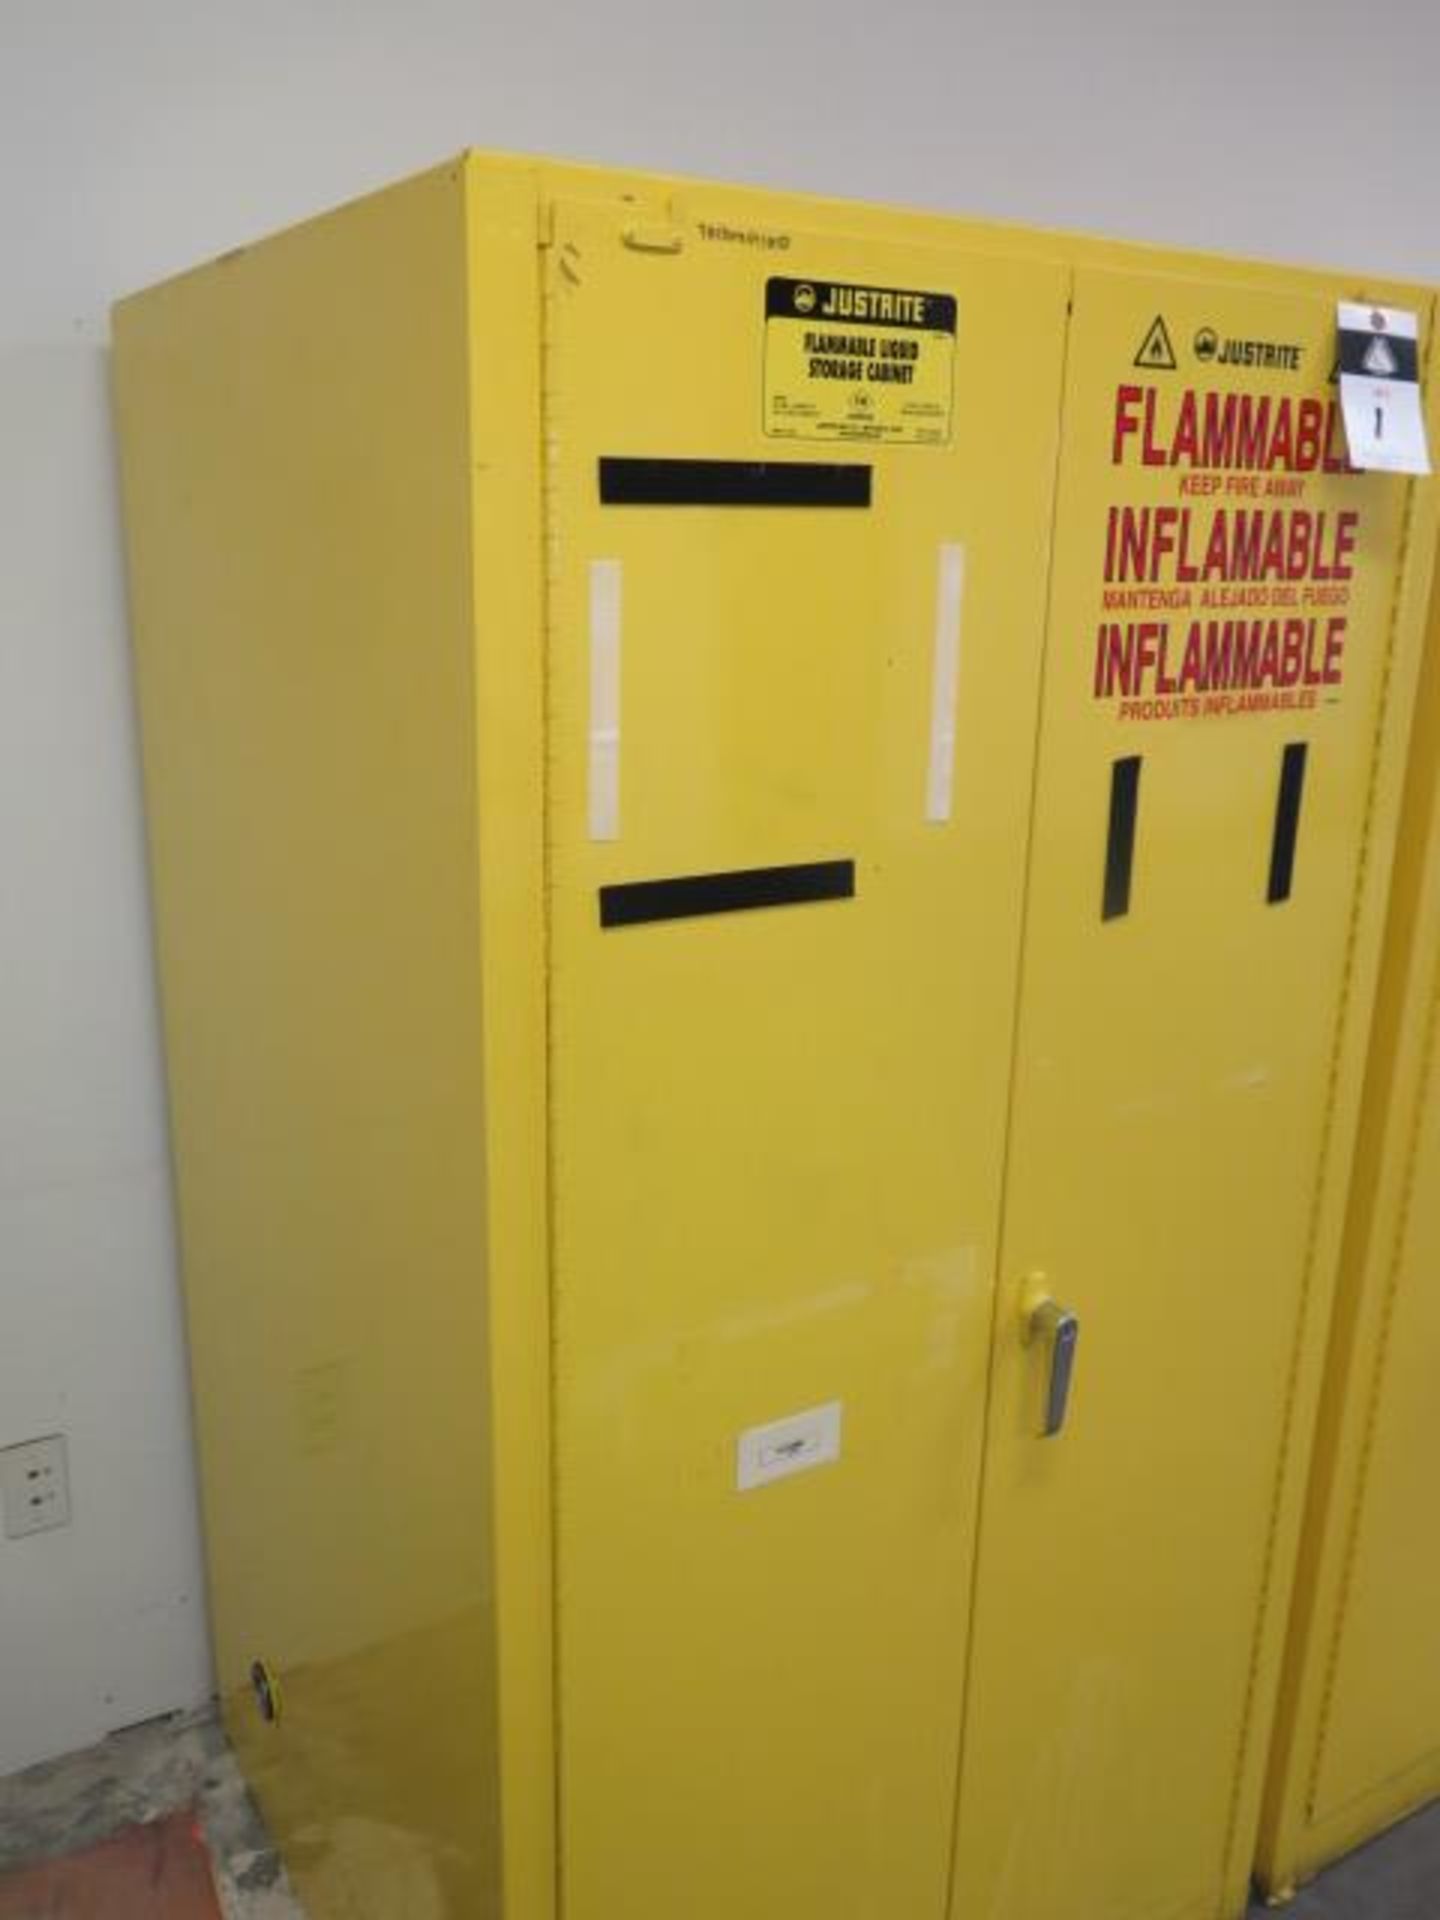 Justrite Flammables Storage Cabinet (SOLD AS-IS - NO WARRANTY) - Image 2 of 7